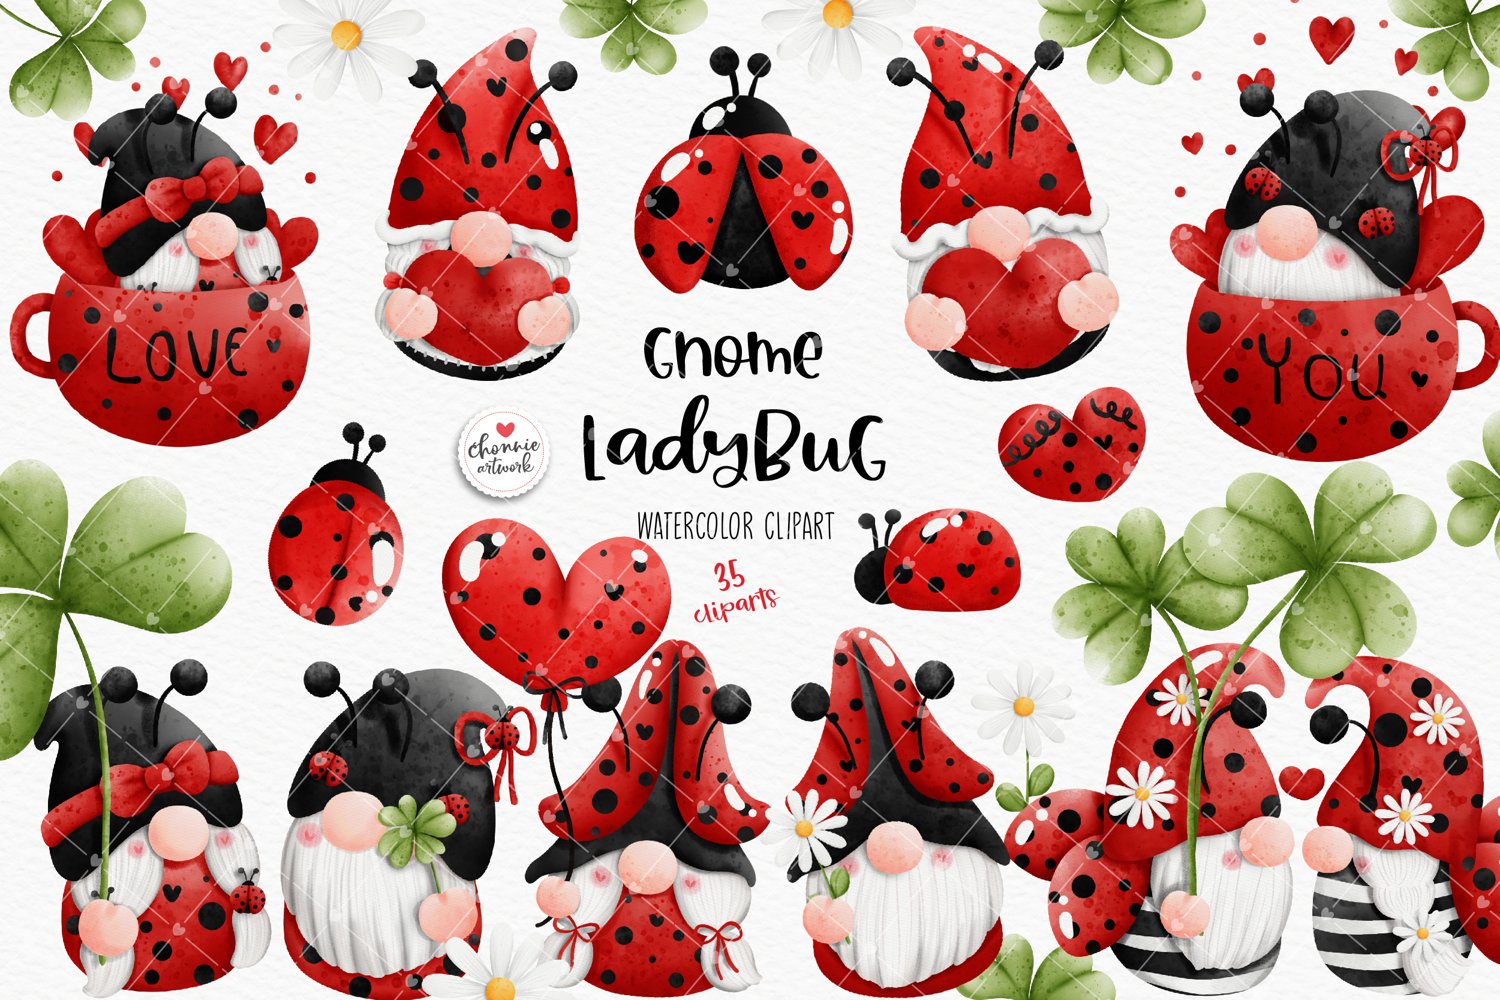 Cover image of Gnome ladybug clipart.